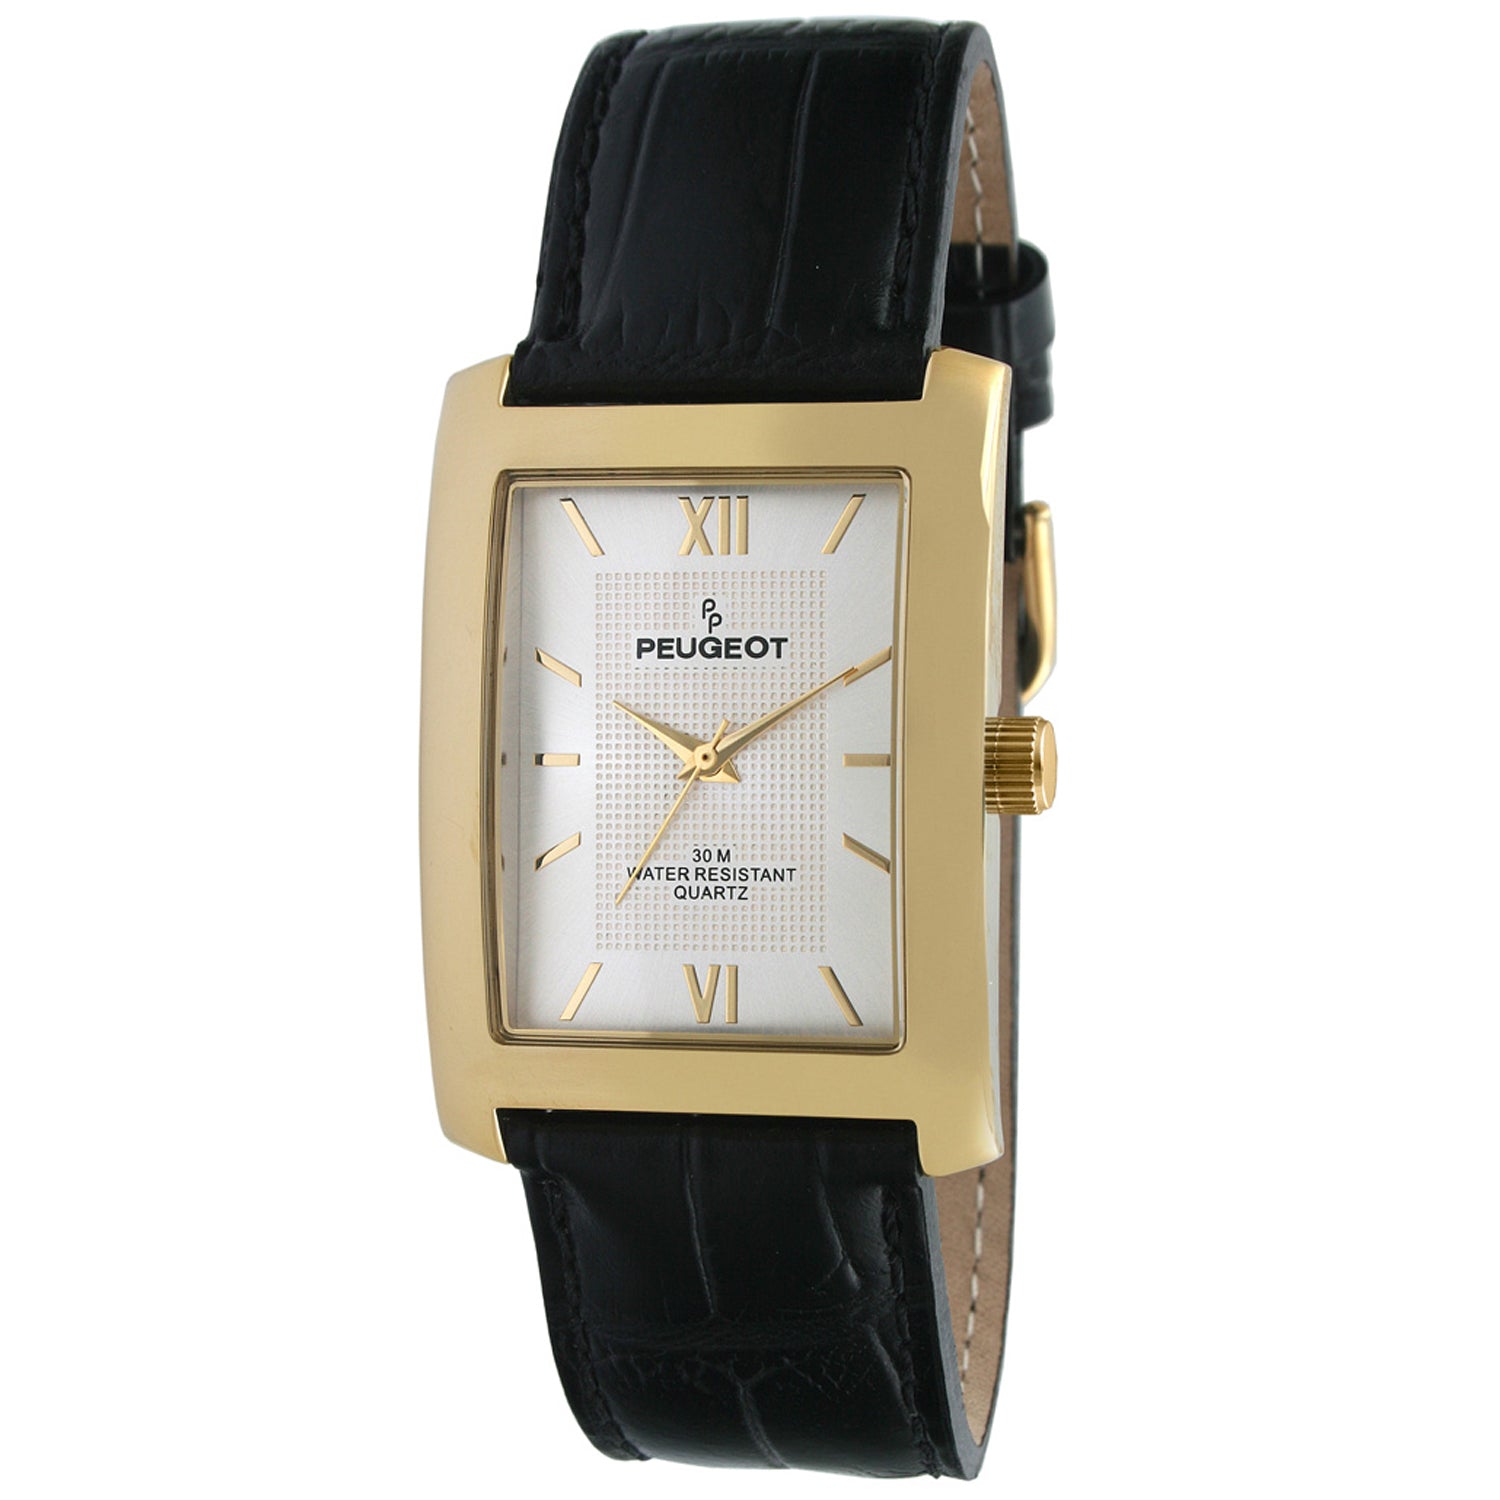 Peugeot Women's Watch Gold Round Large Gold Face Brown Leather